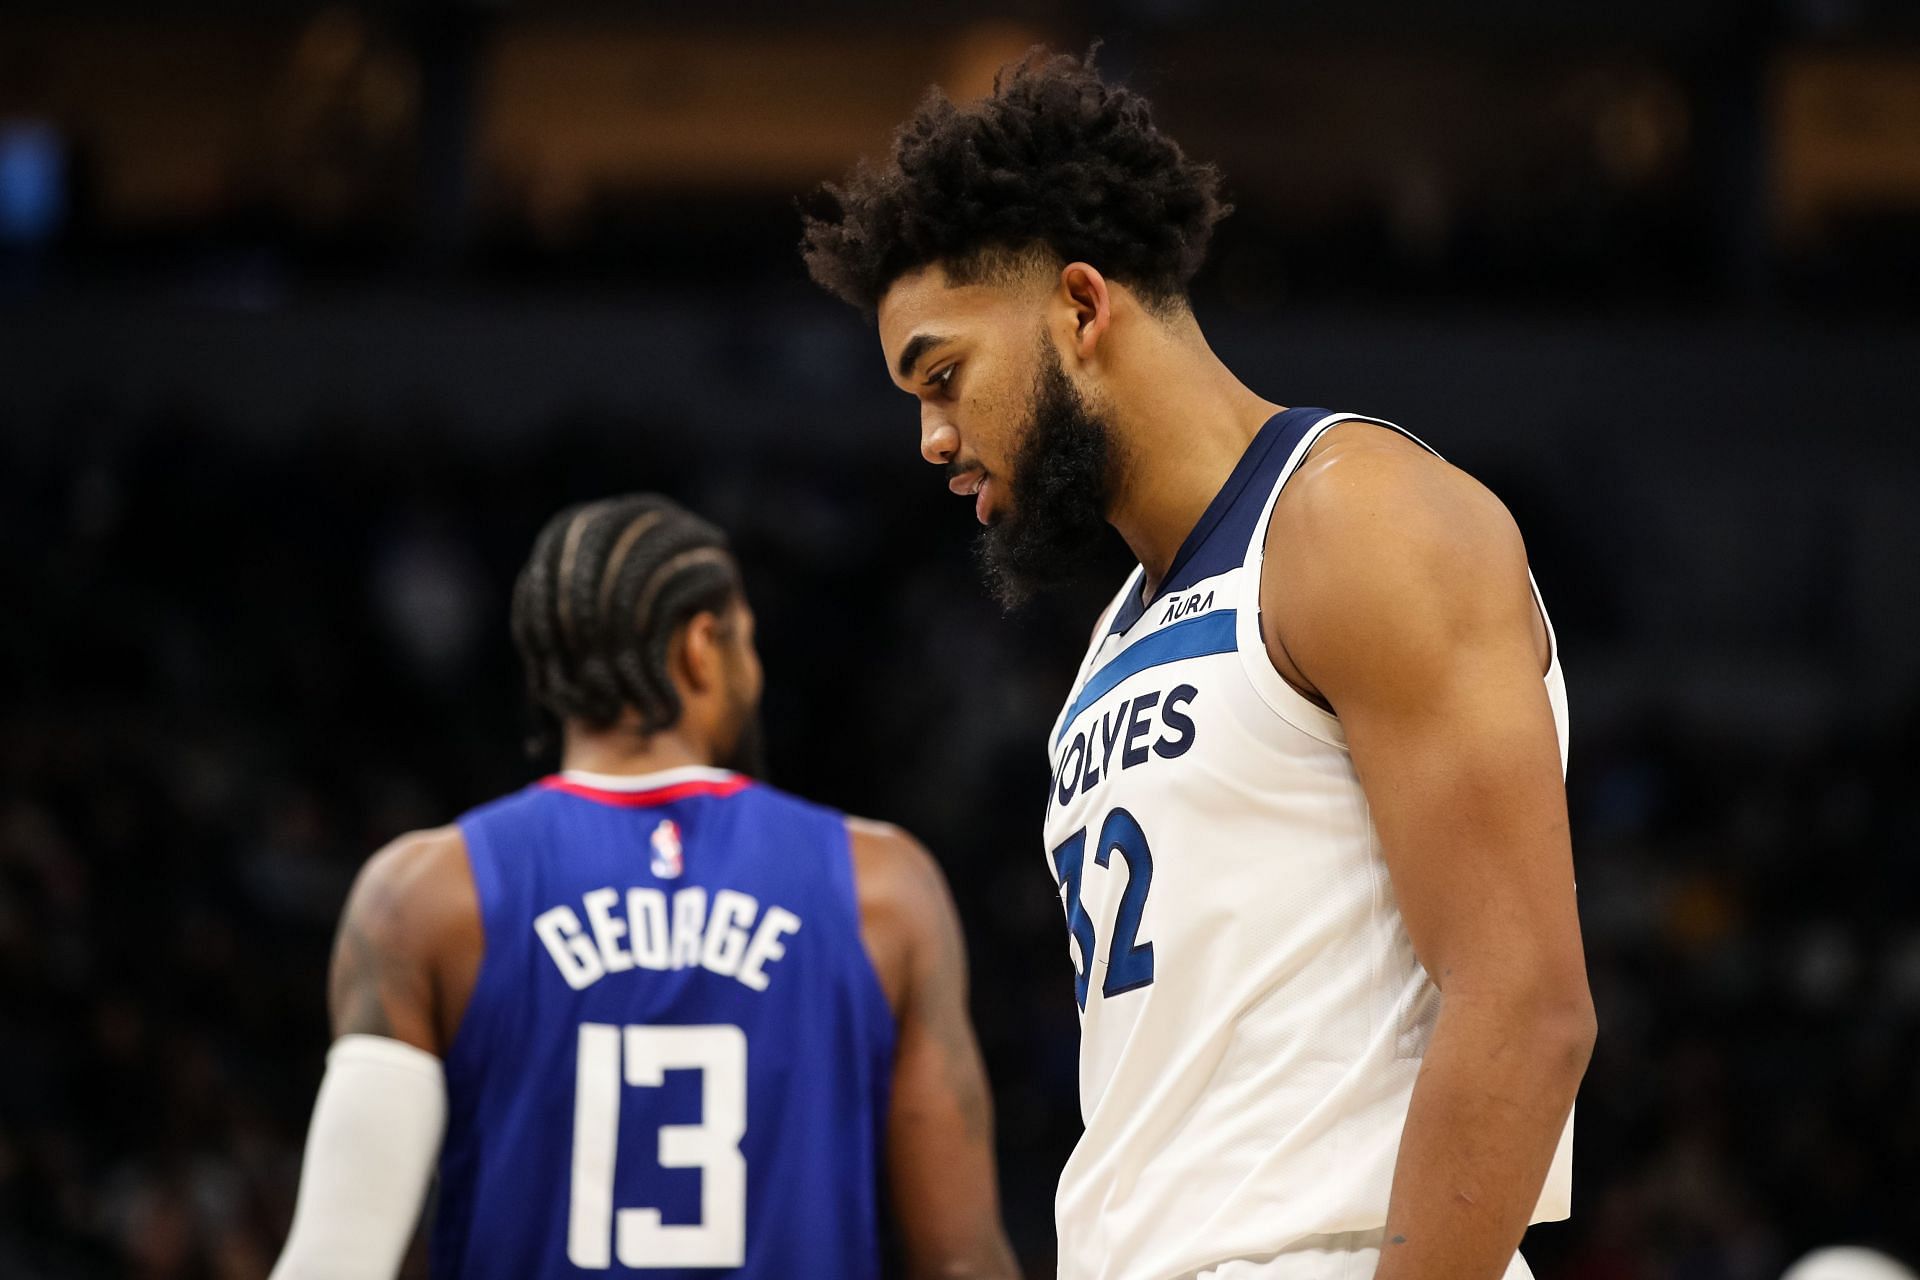 The Minnesota Timberwolves are winless this season against the Los Angeles Clippers